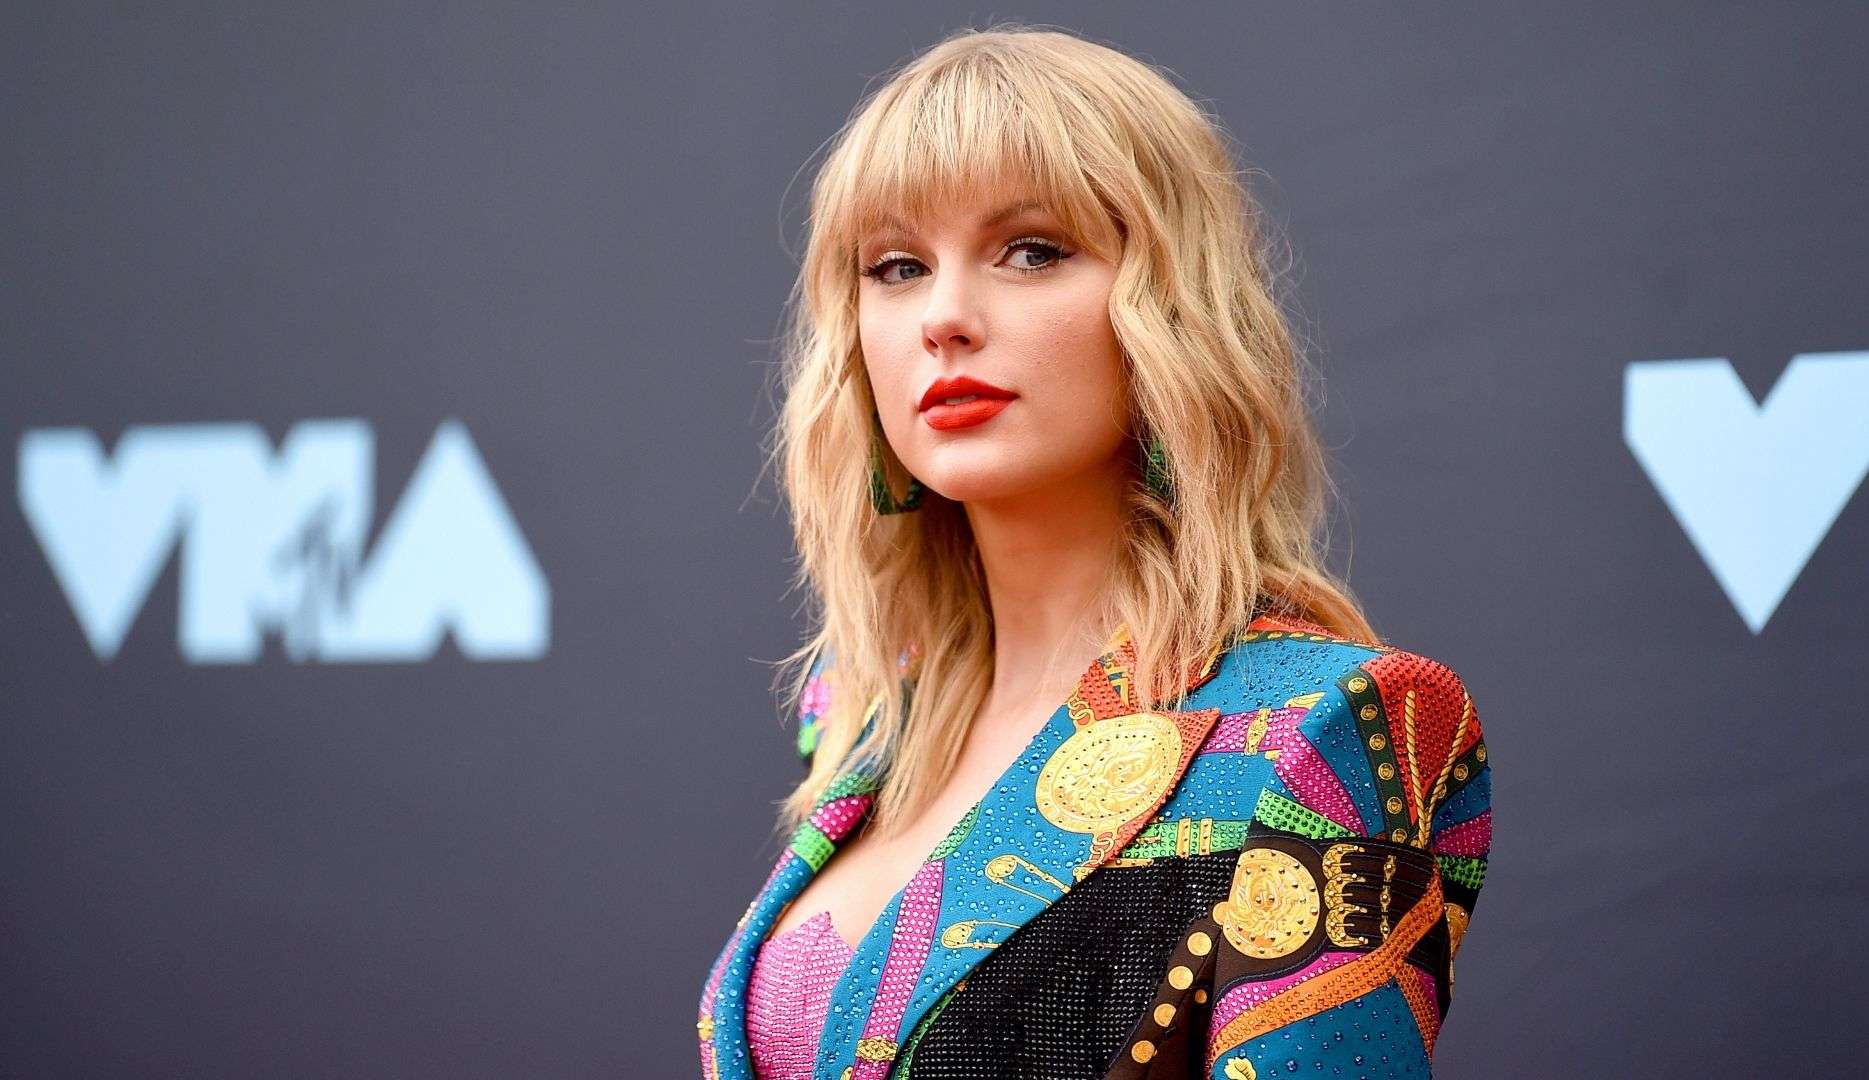 Rumors about Taylor Swift's return to the stage are intensifying